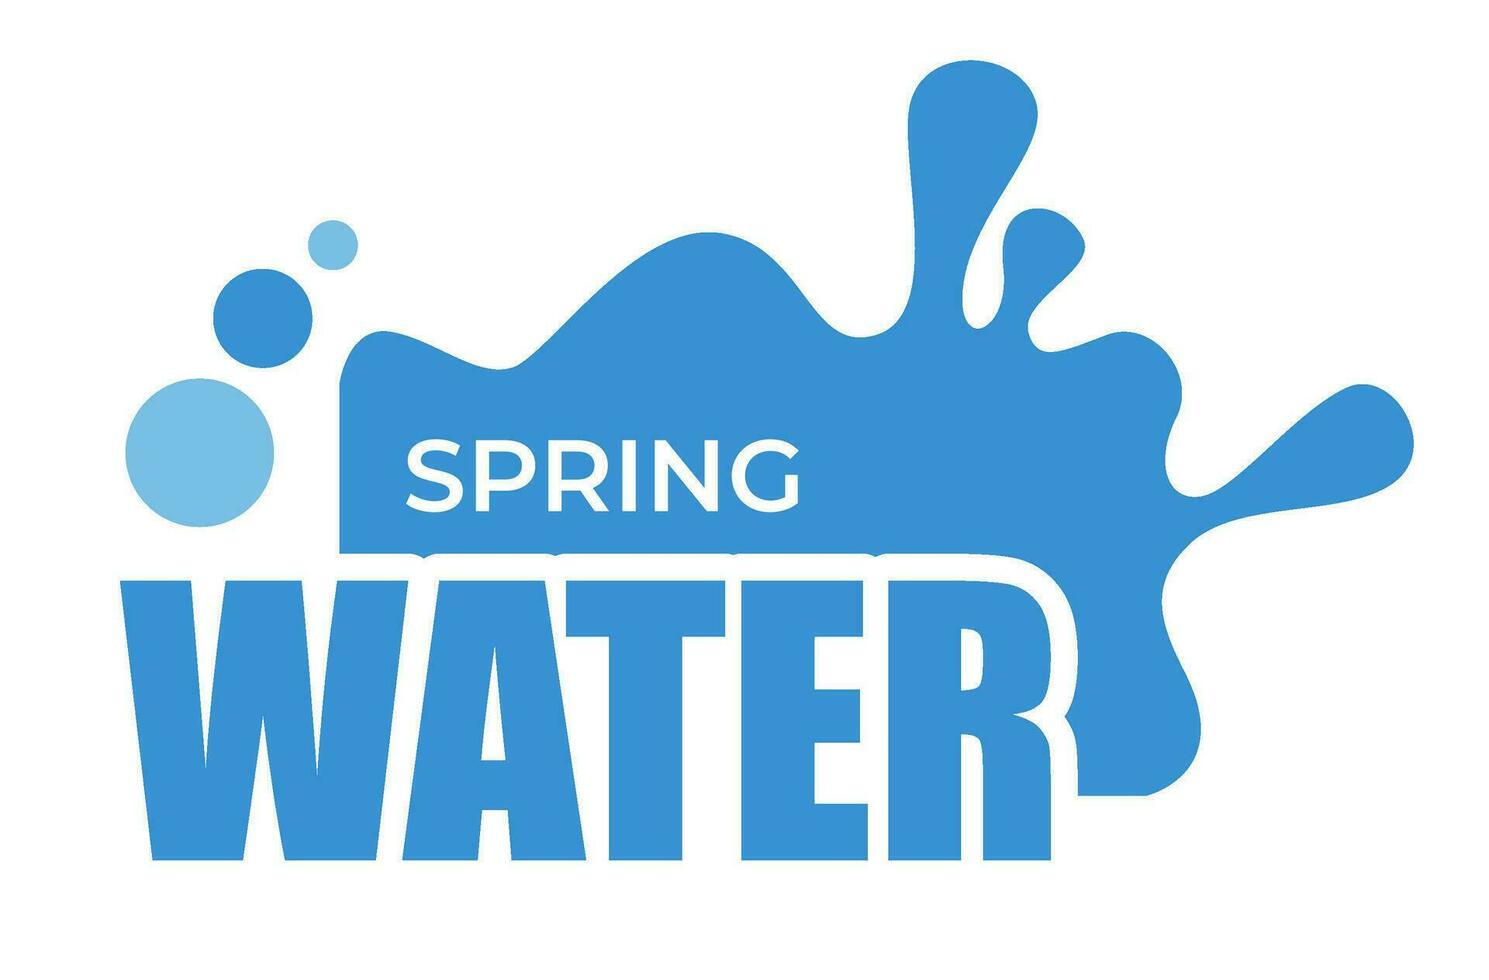 Spring water natural ingredient for dieting vector